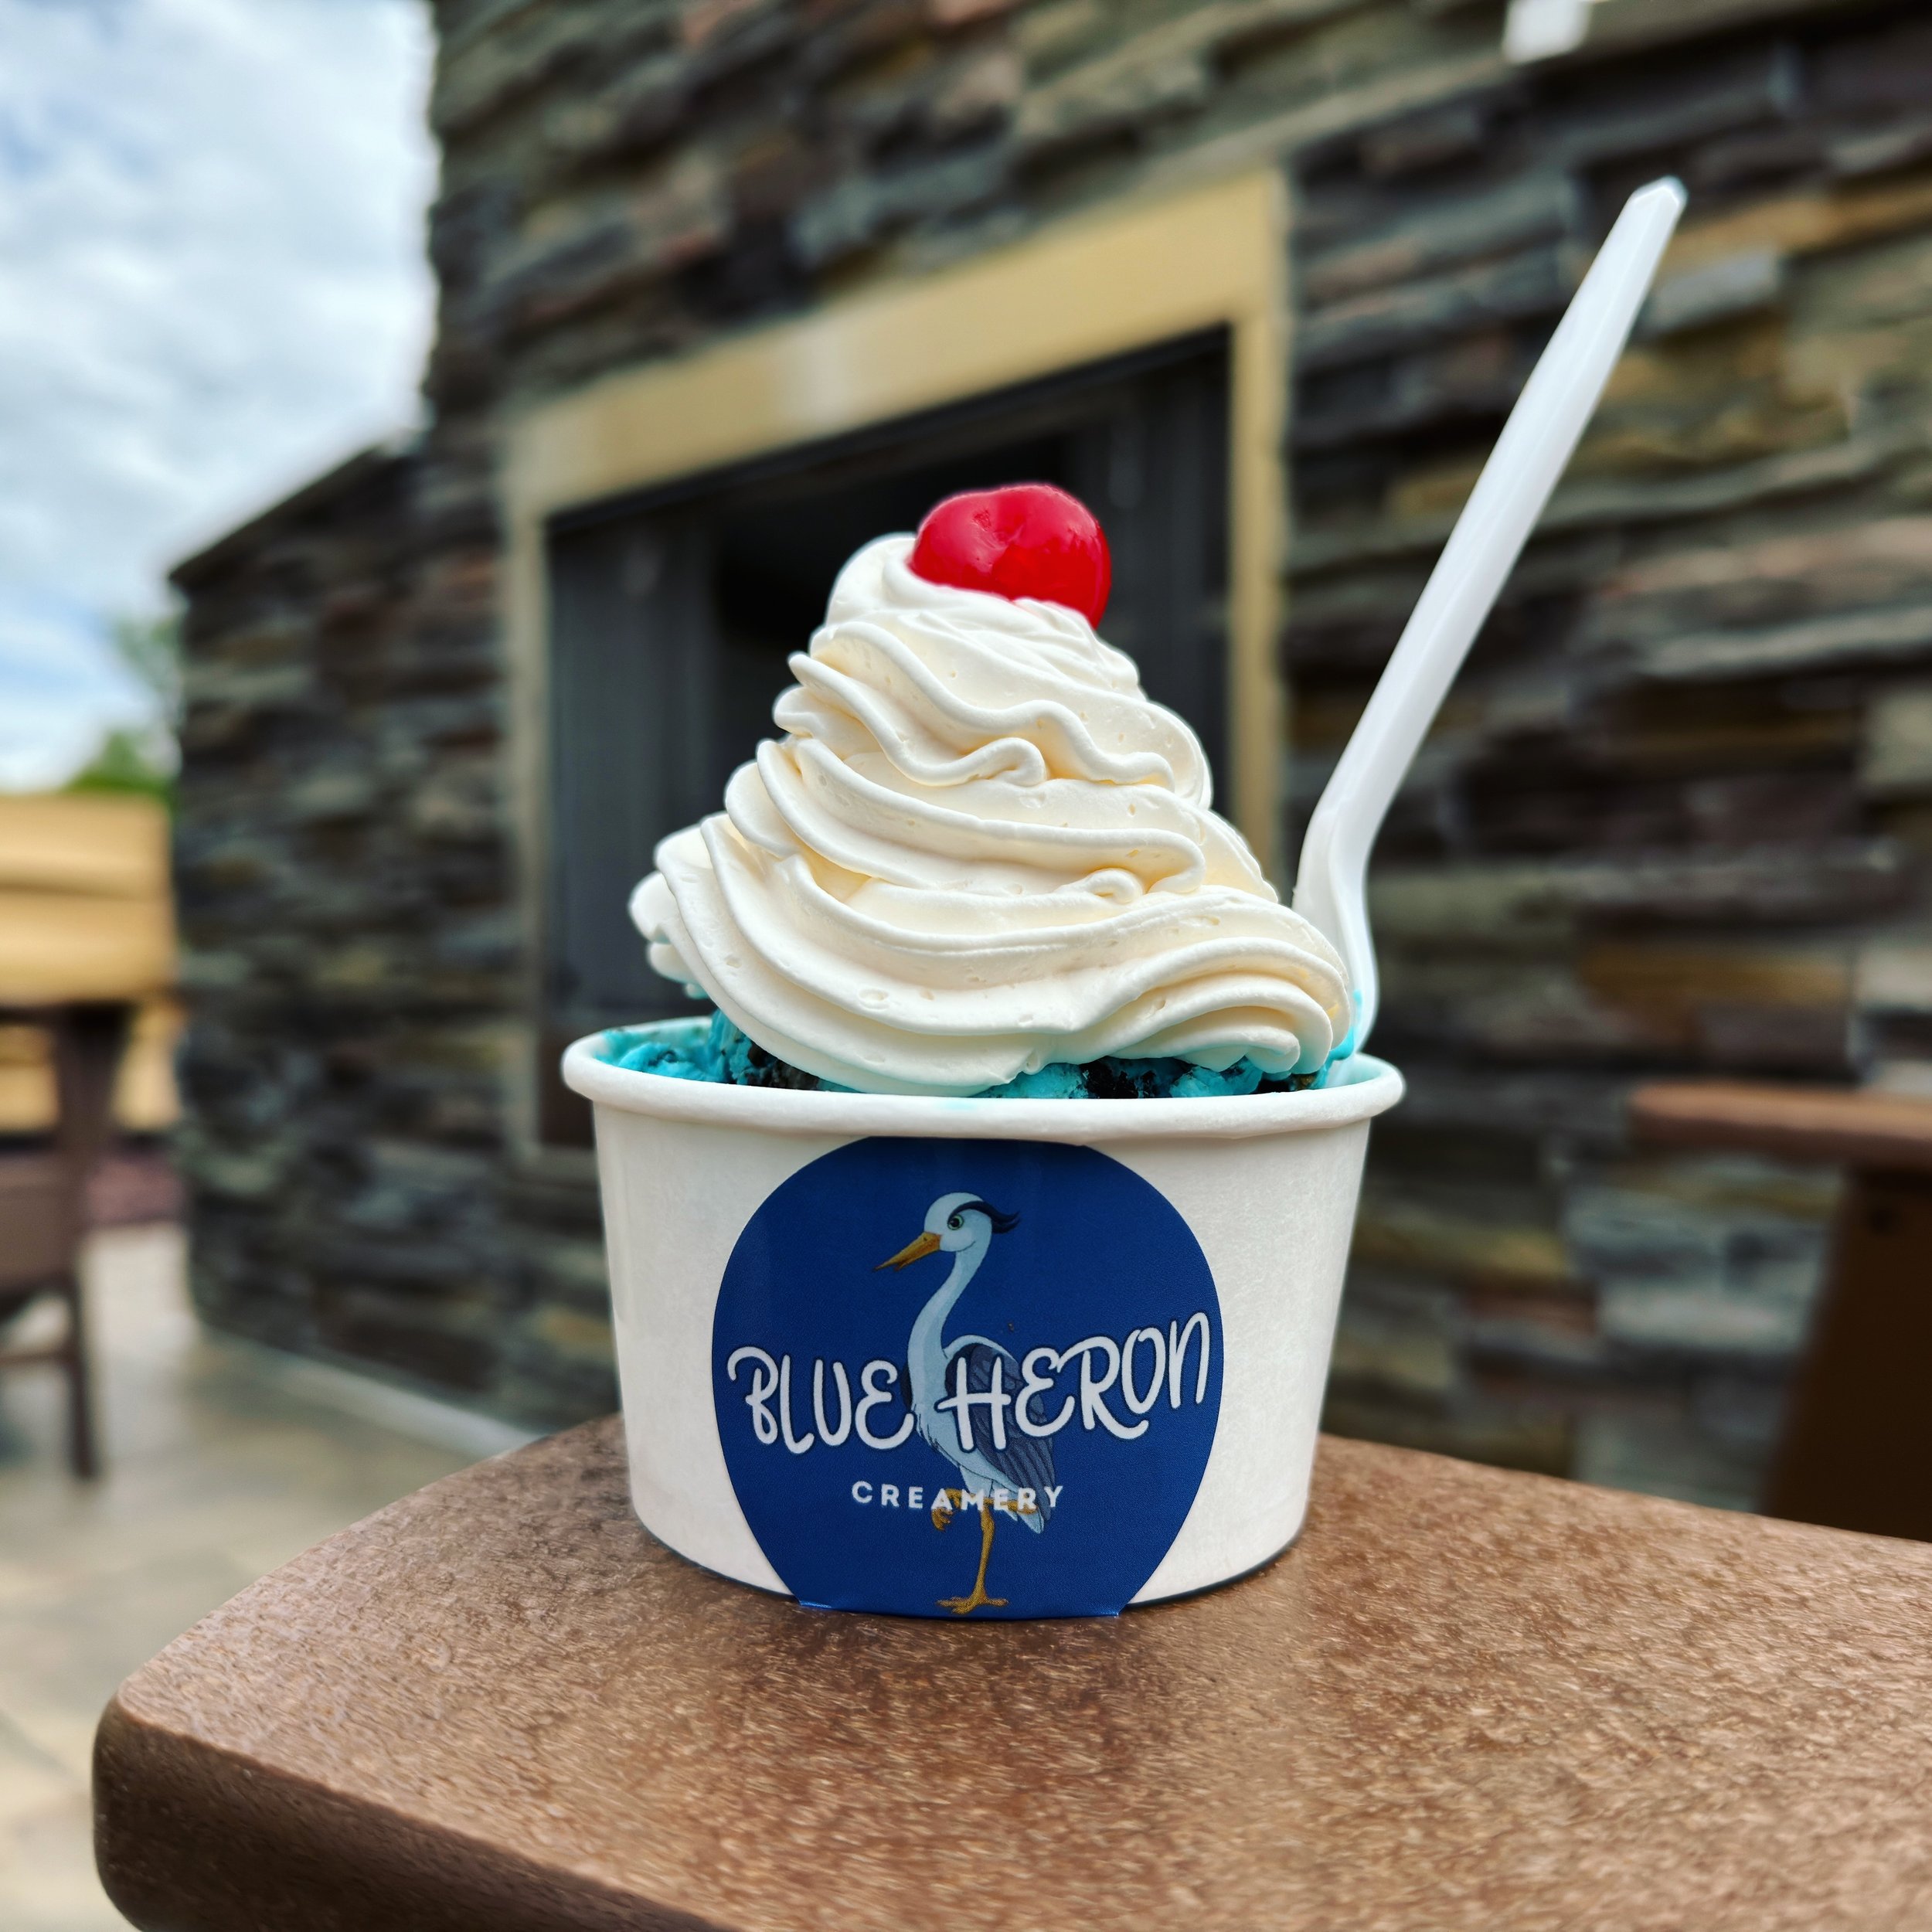 It&rsquo;s a great night to hang by the fireplace with a big scoop of Local Ice Cream 🍦🔥

#instagood #cteats #ctbites #enfield #dessert #foodie #ctfoodie #somers #windsor #longmeadow #windsorlocks  #sundae #supportlocal #local #icecream #local #eat